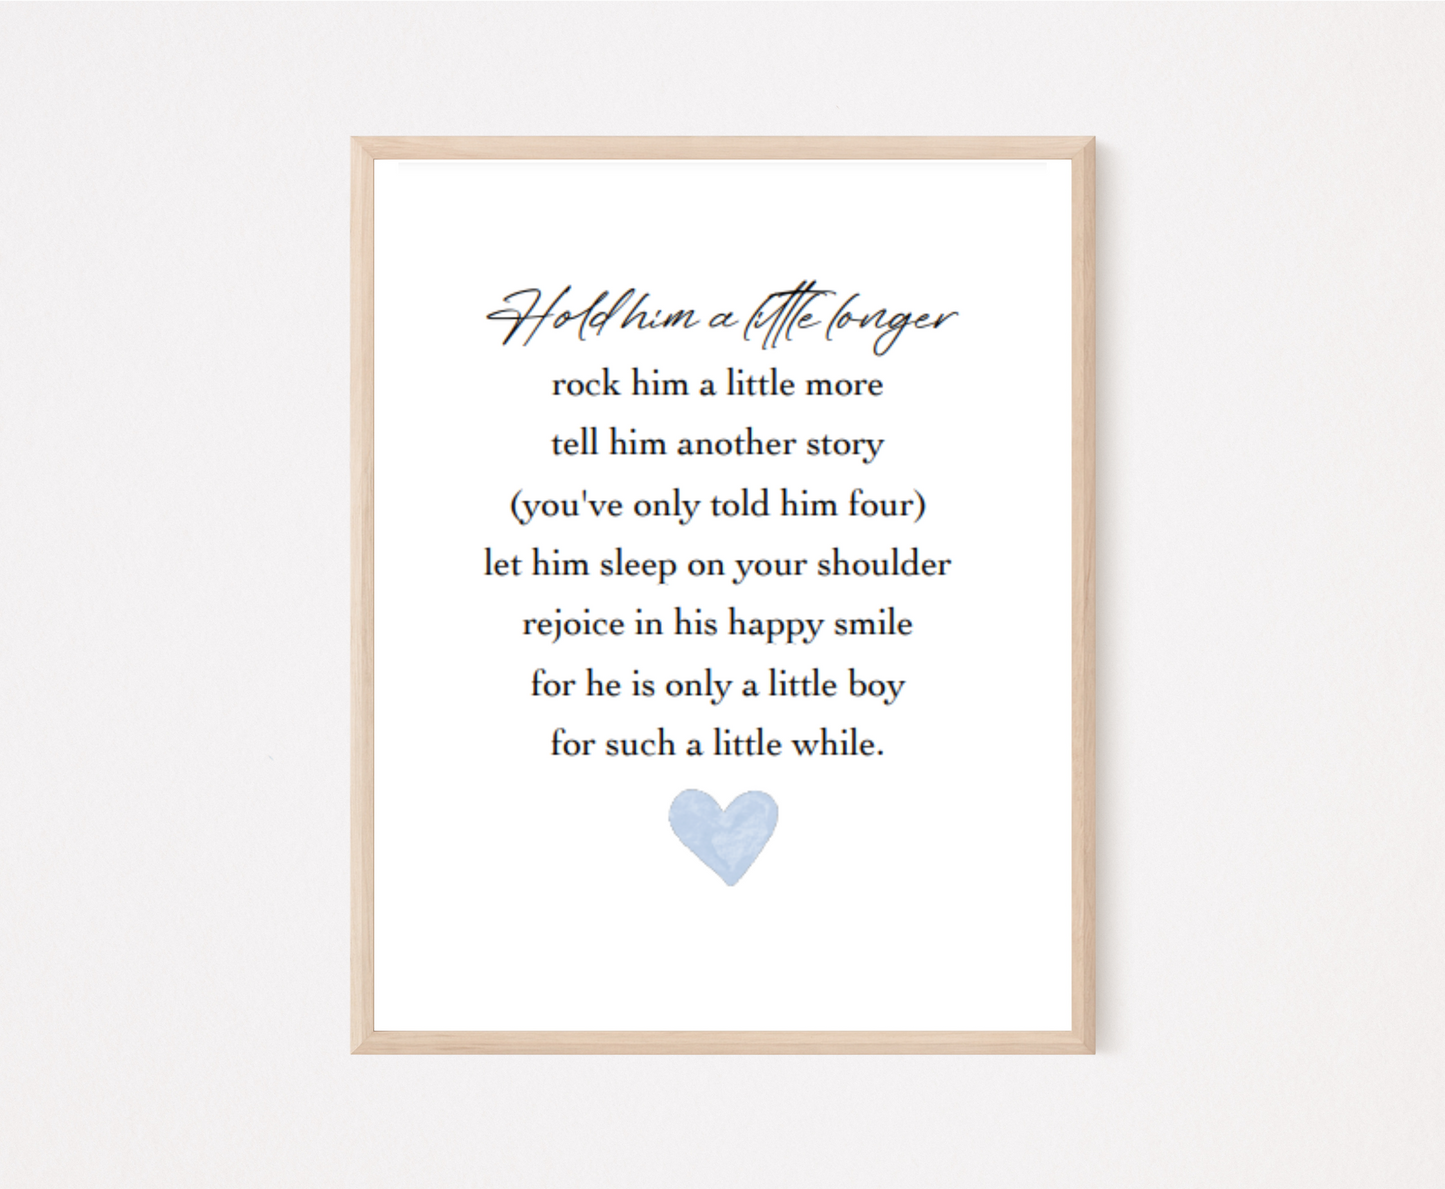 A digital poster that has a blue heart at the bottom, and a piece of writing above it that says: Hold him a little longer, rock him a little more, tell him another story, (you have only told him four), let him sleep on your shoulder, rejoice in his happy smile, for he is only a little boy, for such a little while.